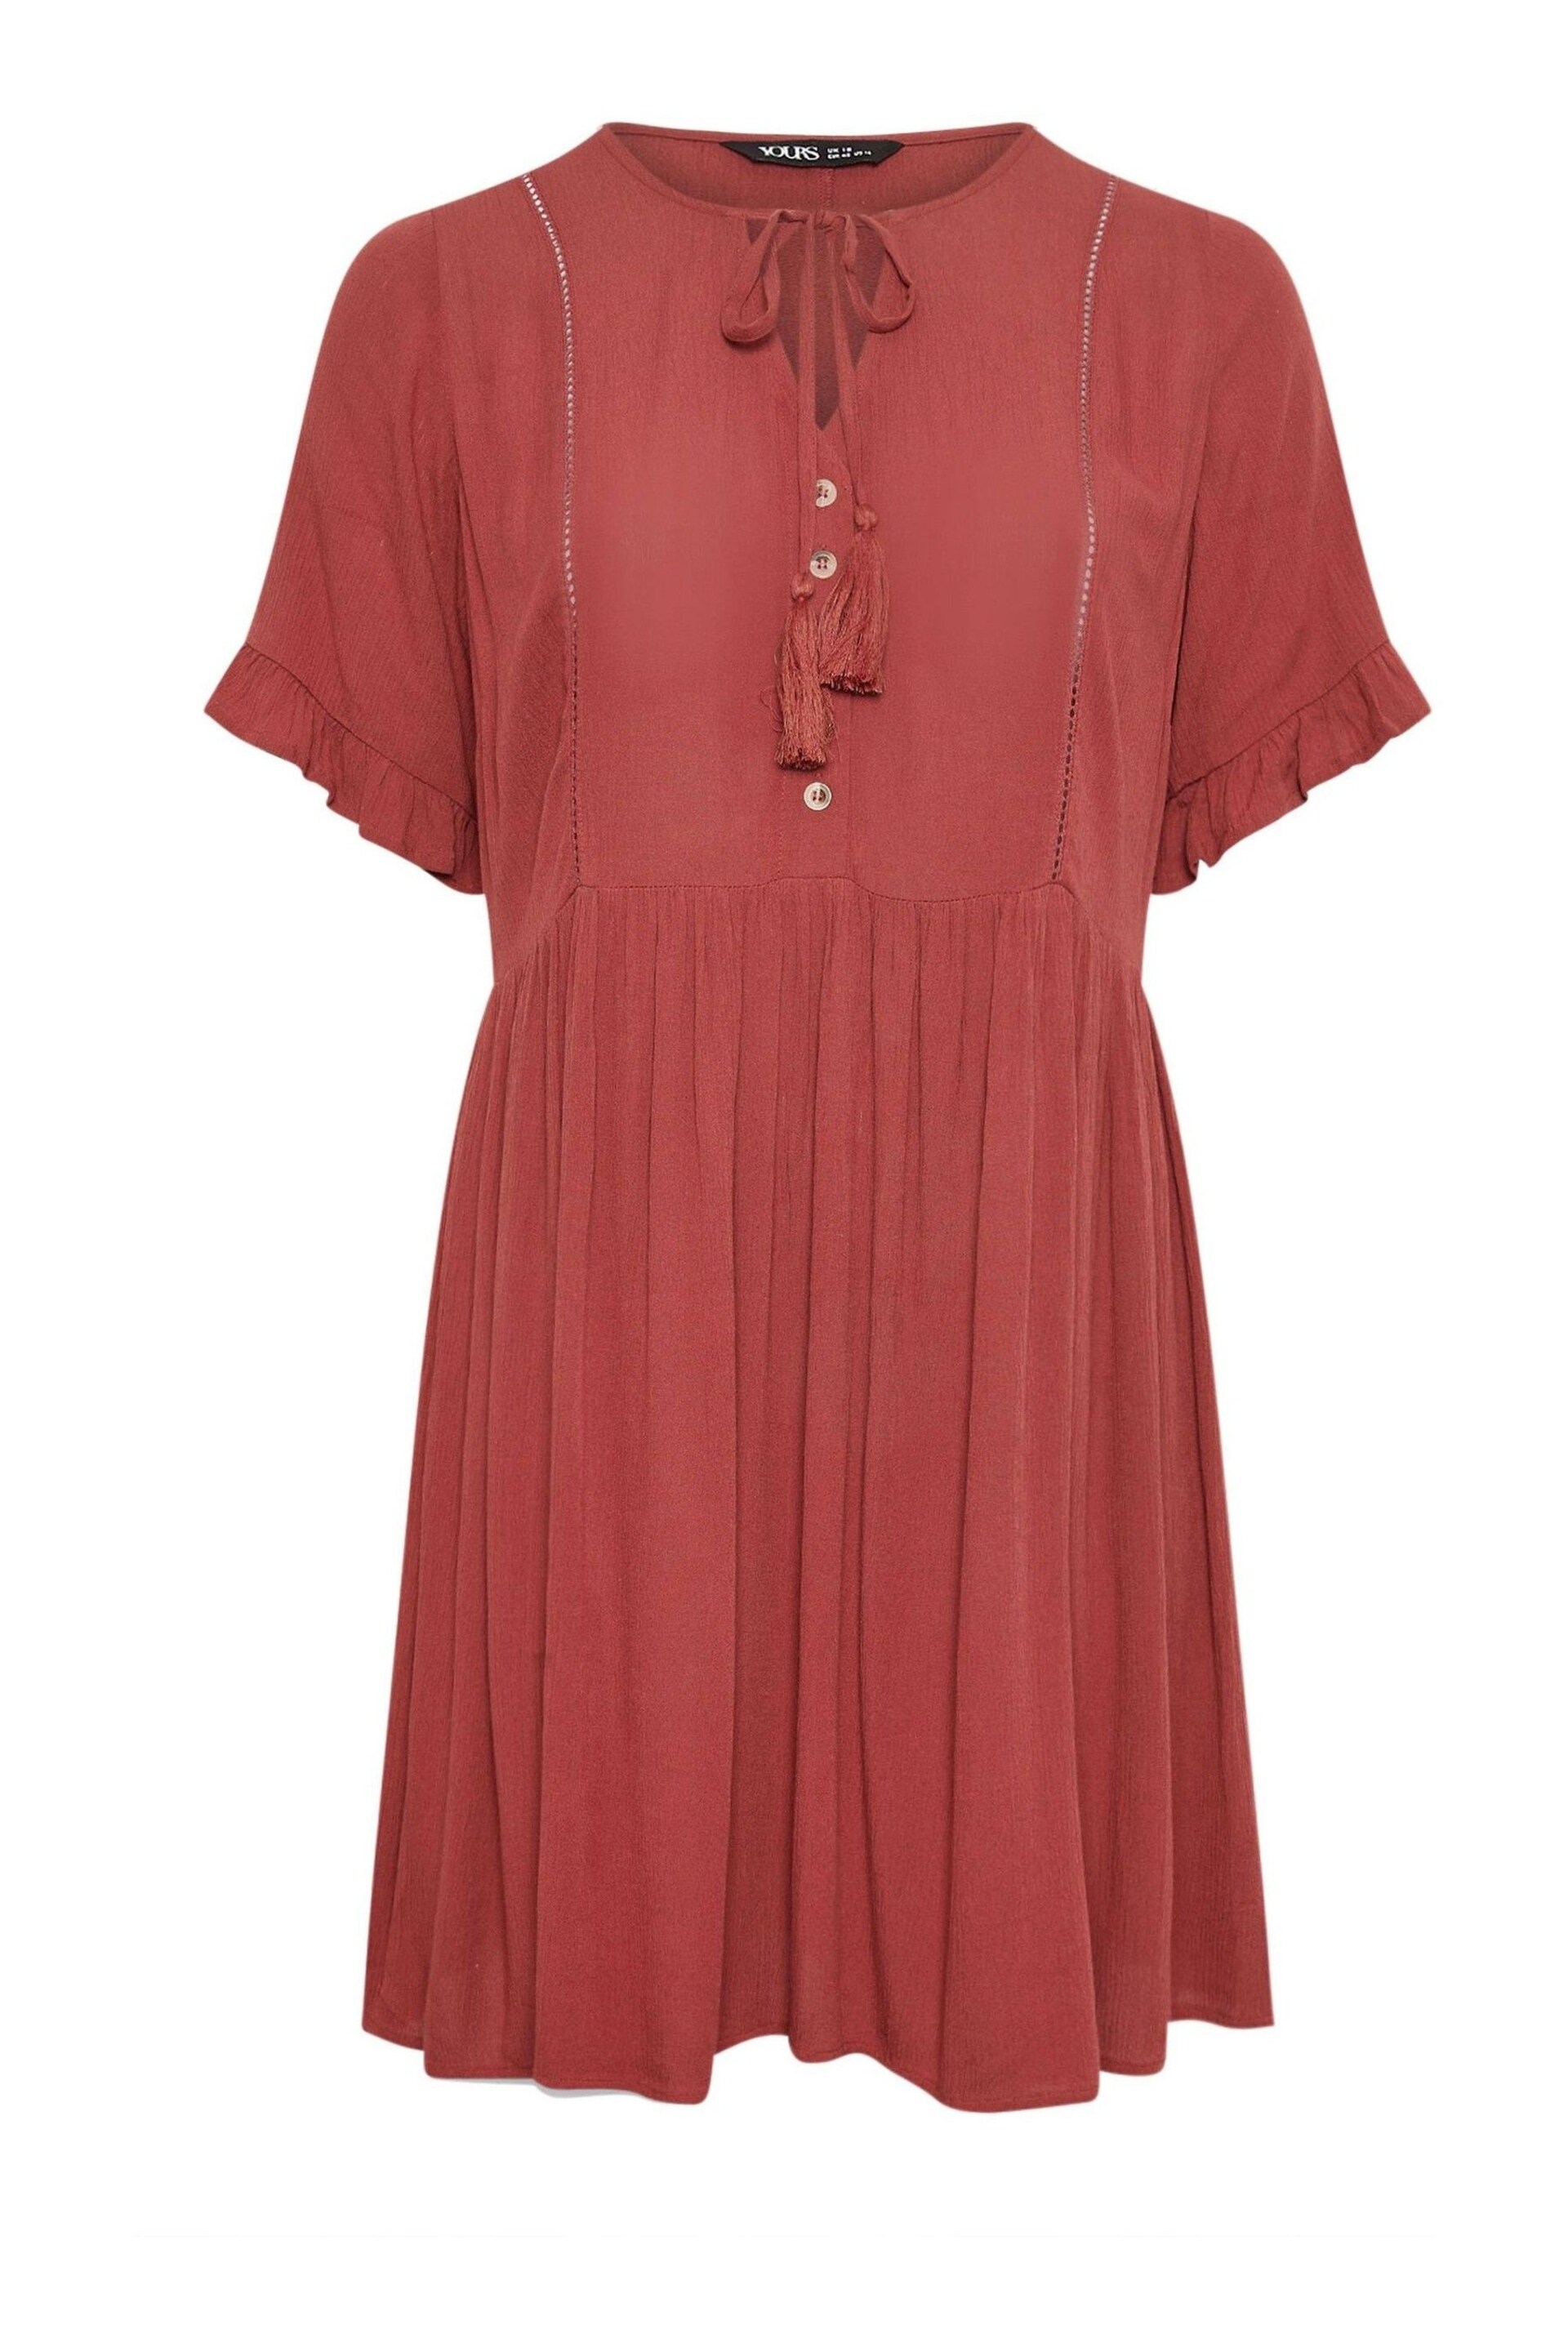 Yours Curve Red Desert Dress - Image 6 of 6